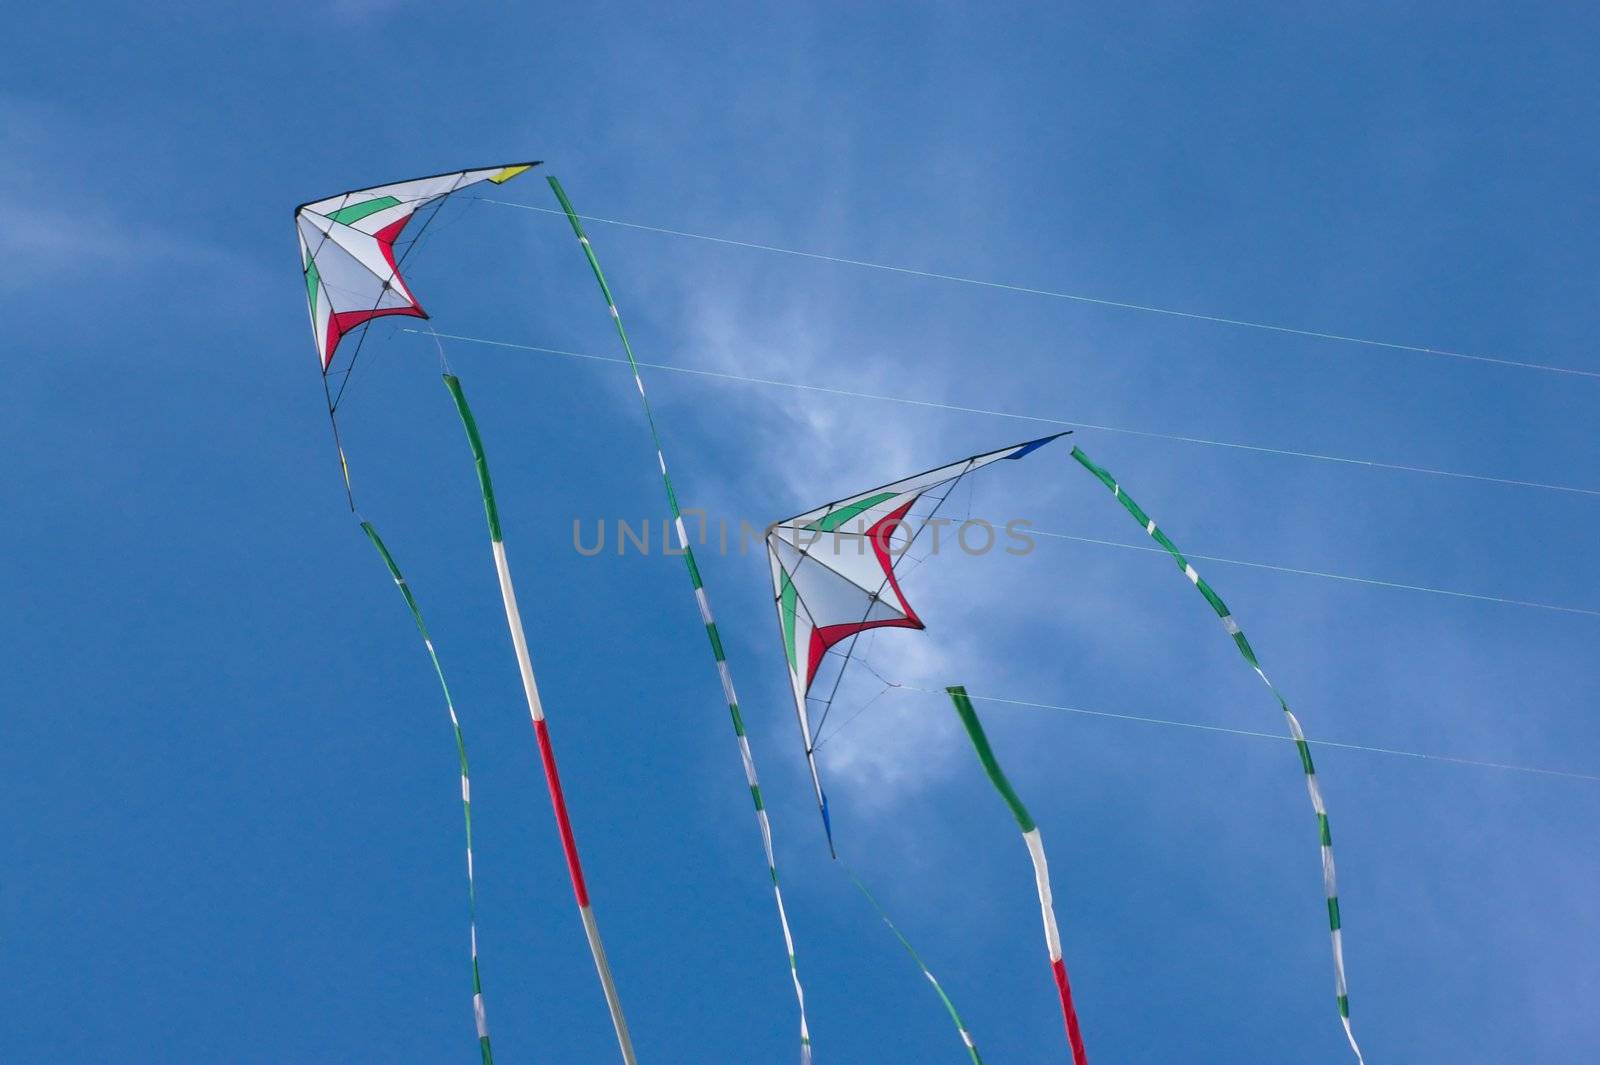 Two kites flying in the blue sky